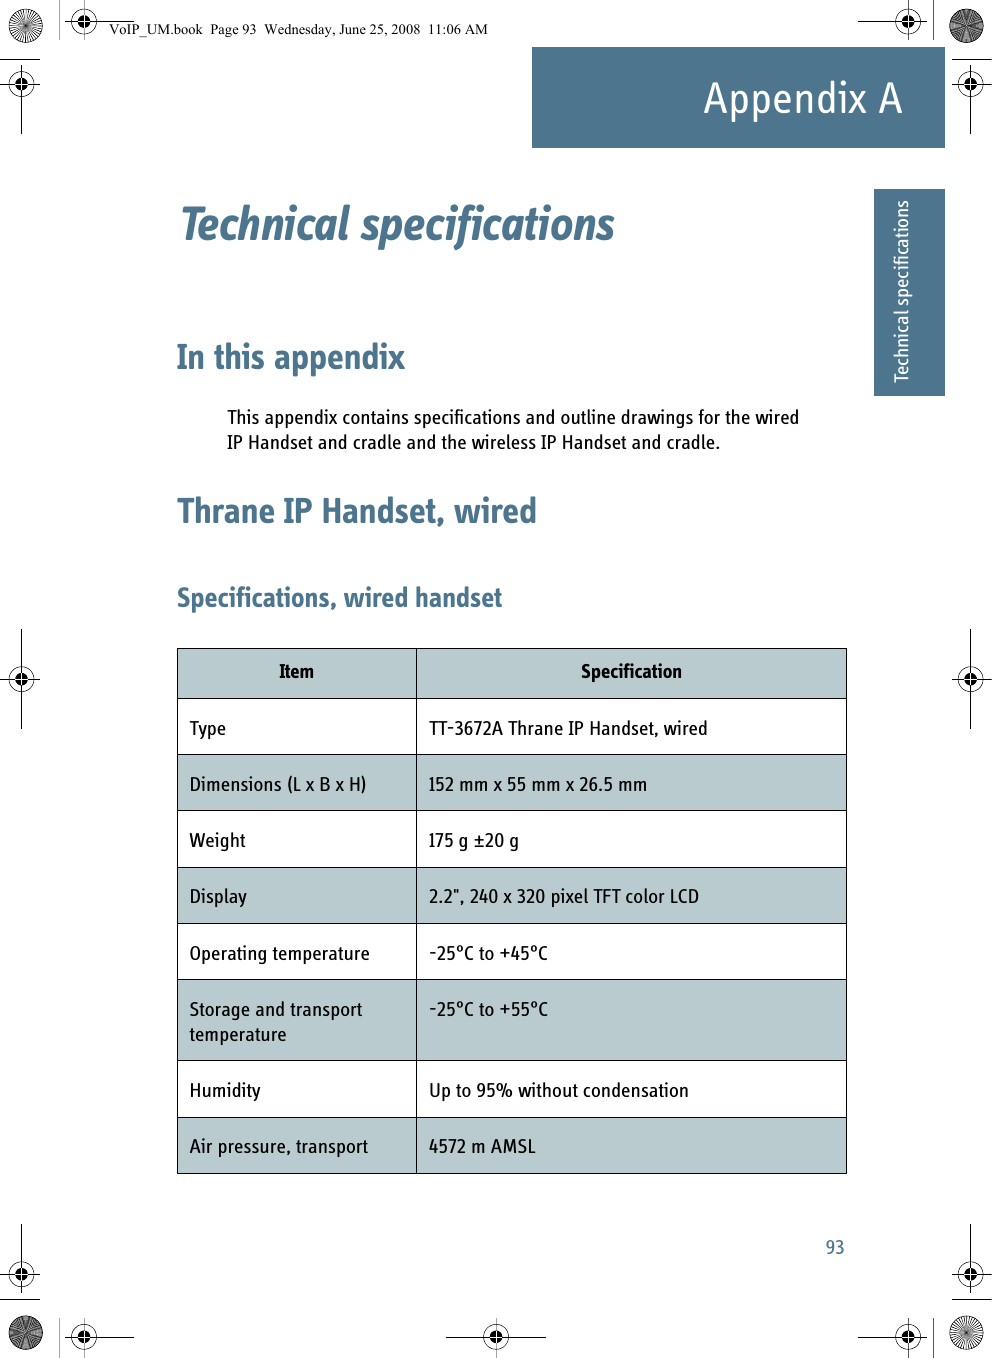 93Appendix AAAAAATechnical specificationsTechnical specifications AIn this appendixThis appendix contains specifications and outline drawings for the wired IP Handset and cradle and the wireless IP Handset and cradle.Thrane IP Handset, wiredSpecifications, wired handsetItem SpecificationType TT-3672A Thrane IP Handset, wiredDimensions (L x B x H) 152 mm x 55 mm x 26.5 mmWeight 175 g ±20 gDisplay 2.2&quot;, 240 x 320 pixel TFT color LCDOperating temperature -25°C to +45°CStorage and transport temperature-25°C to +55°CHumidity Up to 95% without condensationAir pressure, transport 4572 m AMSLVoIP_UM.book  Page 93  Wednesday, June 25, 2008  11:06 AM